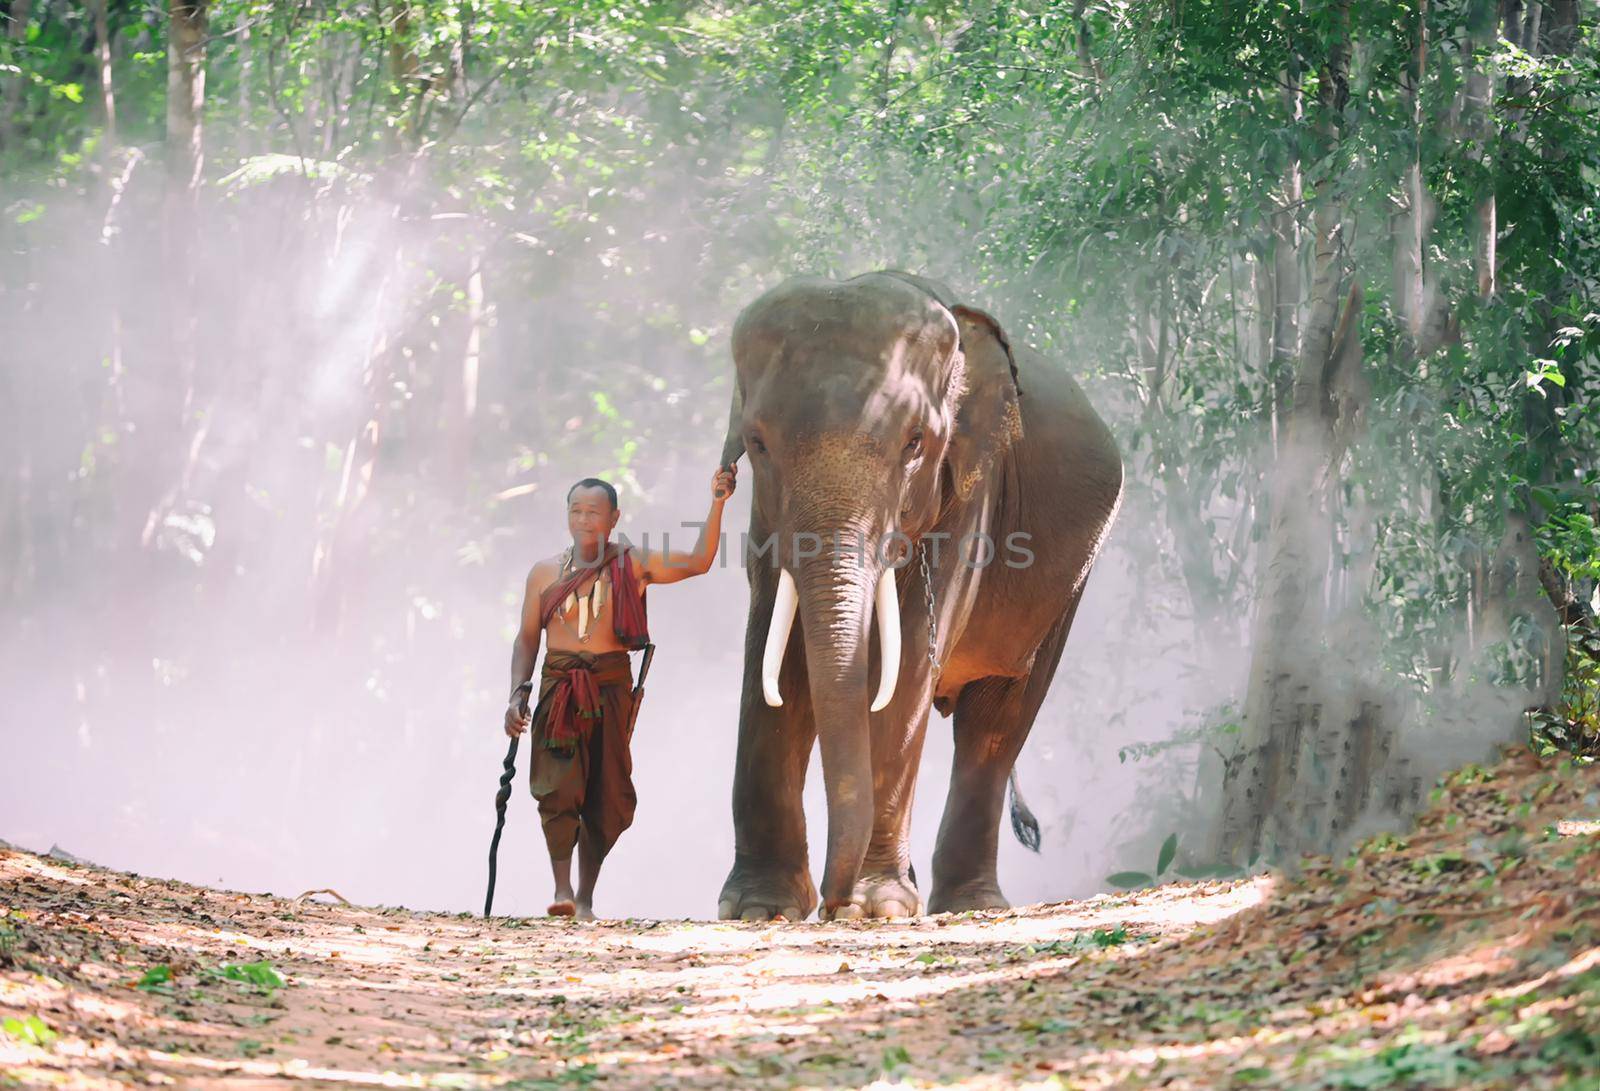 An elephant mahout and elephant walking through the haze in the jungle. Lifestyle of surin elephants village.